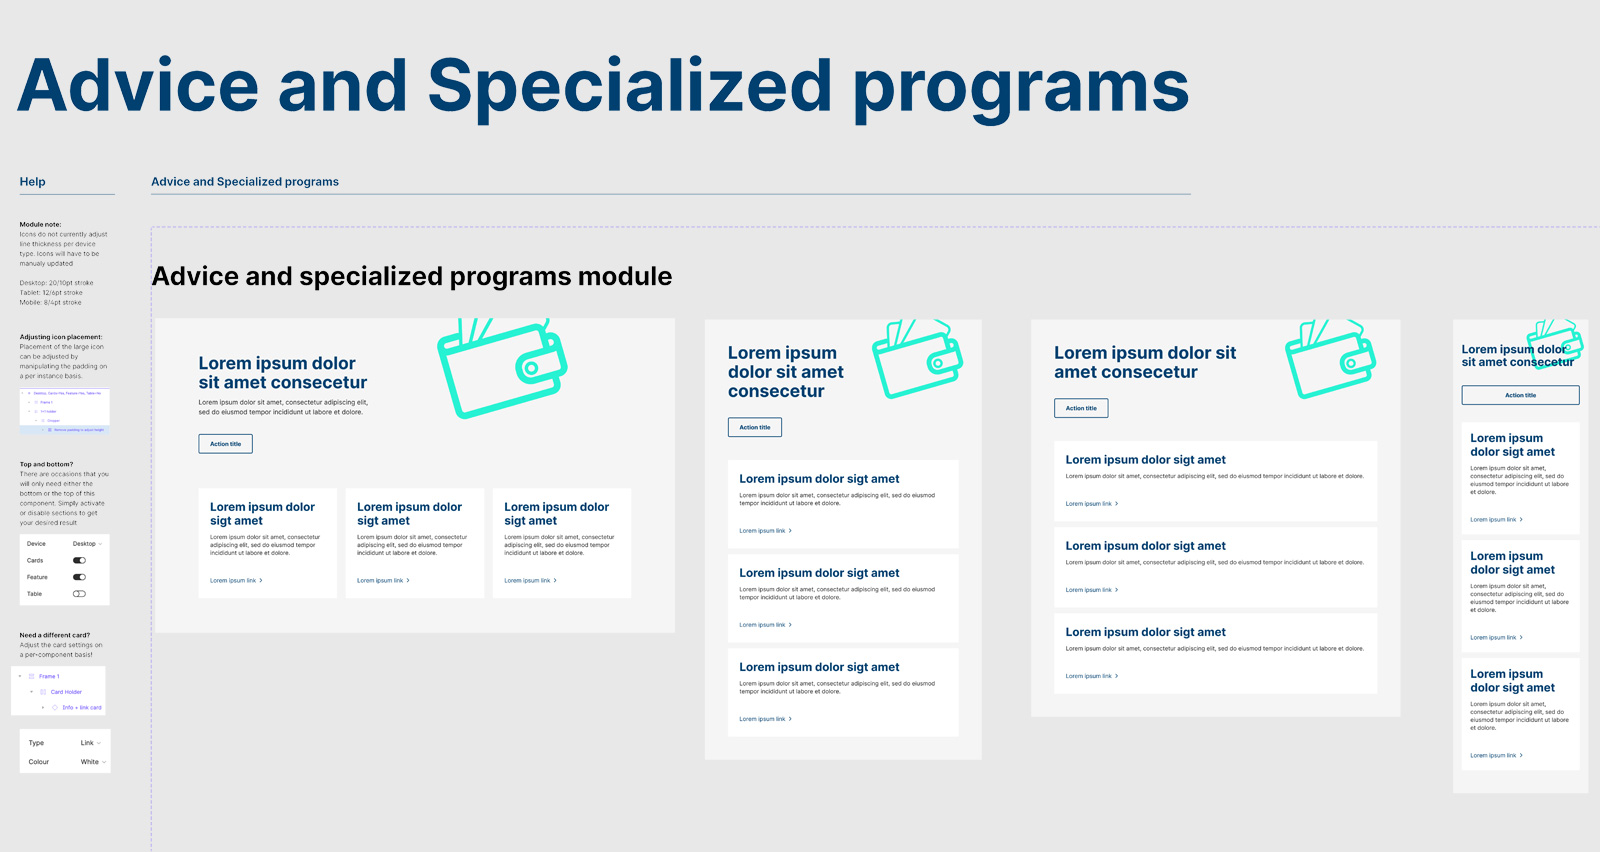 Advice and specialized programs module